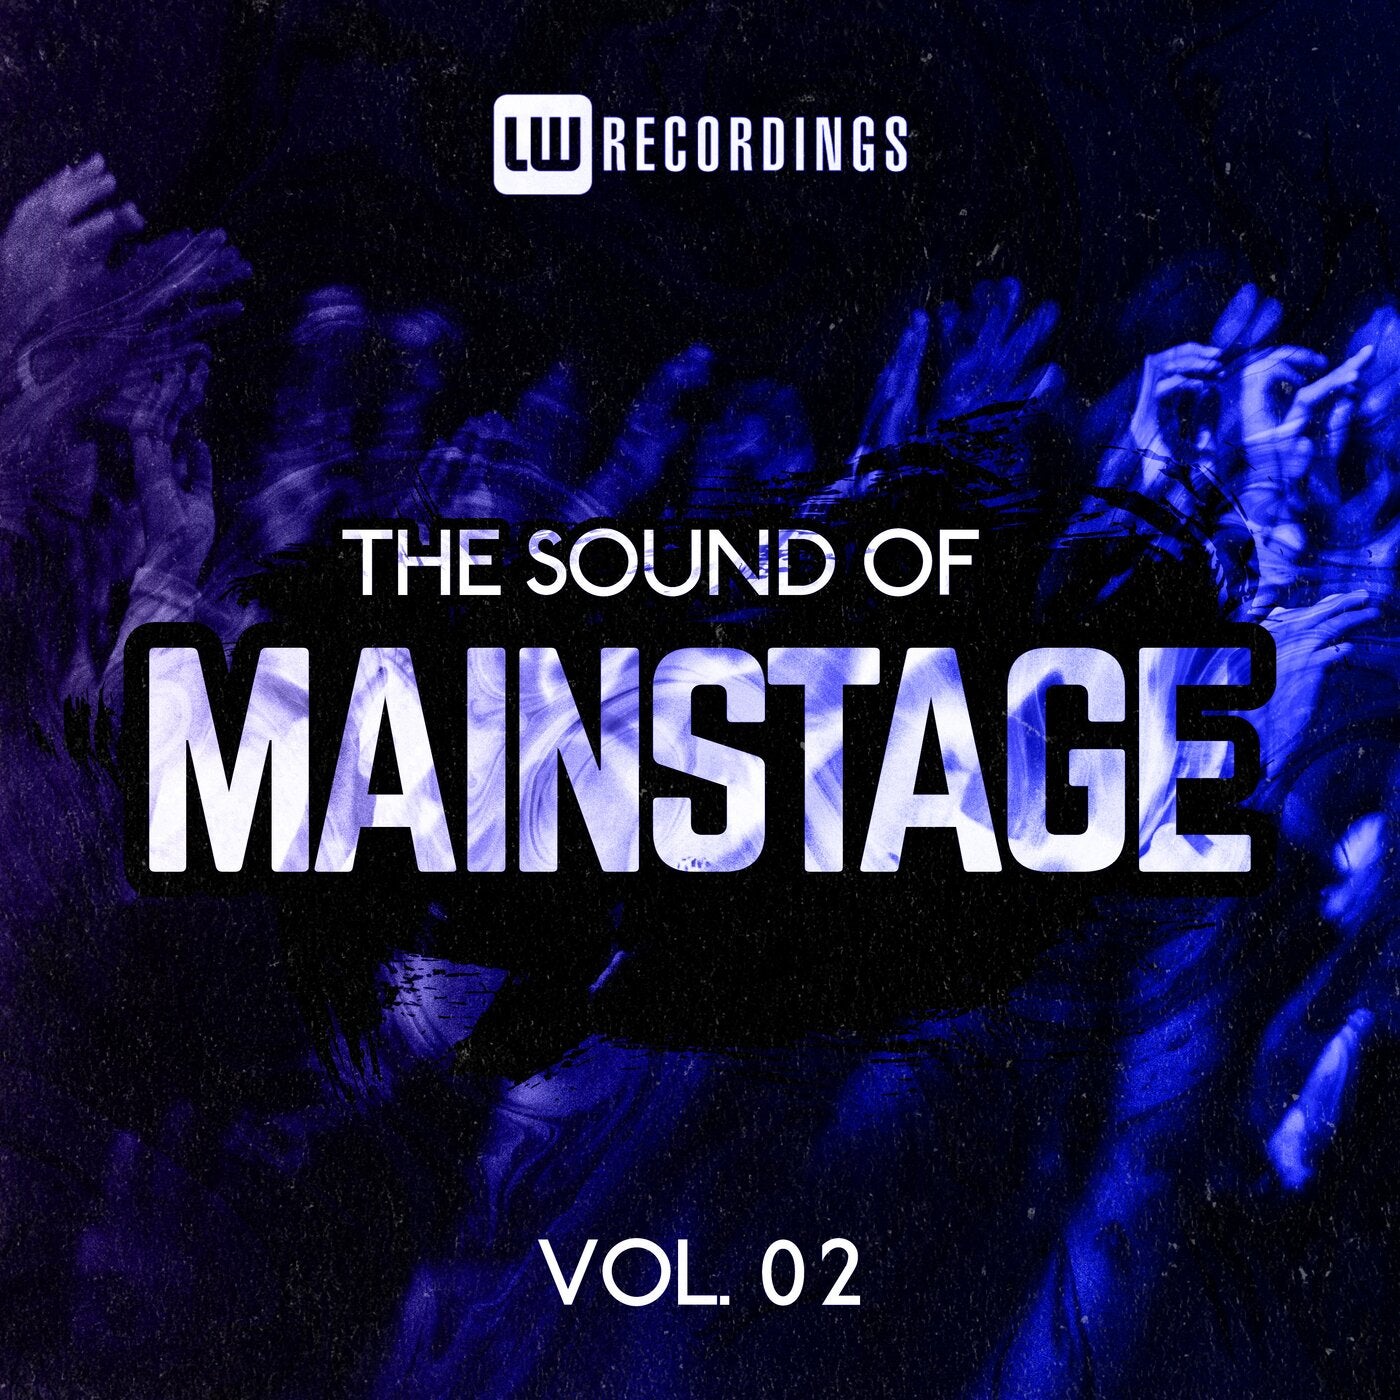 The Sound Of Mainstage, Vol. 02